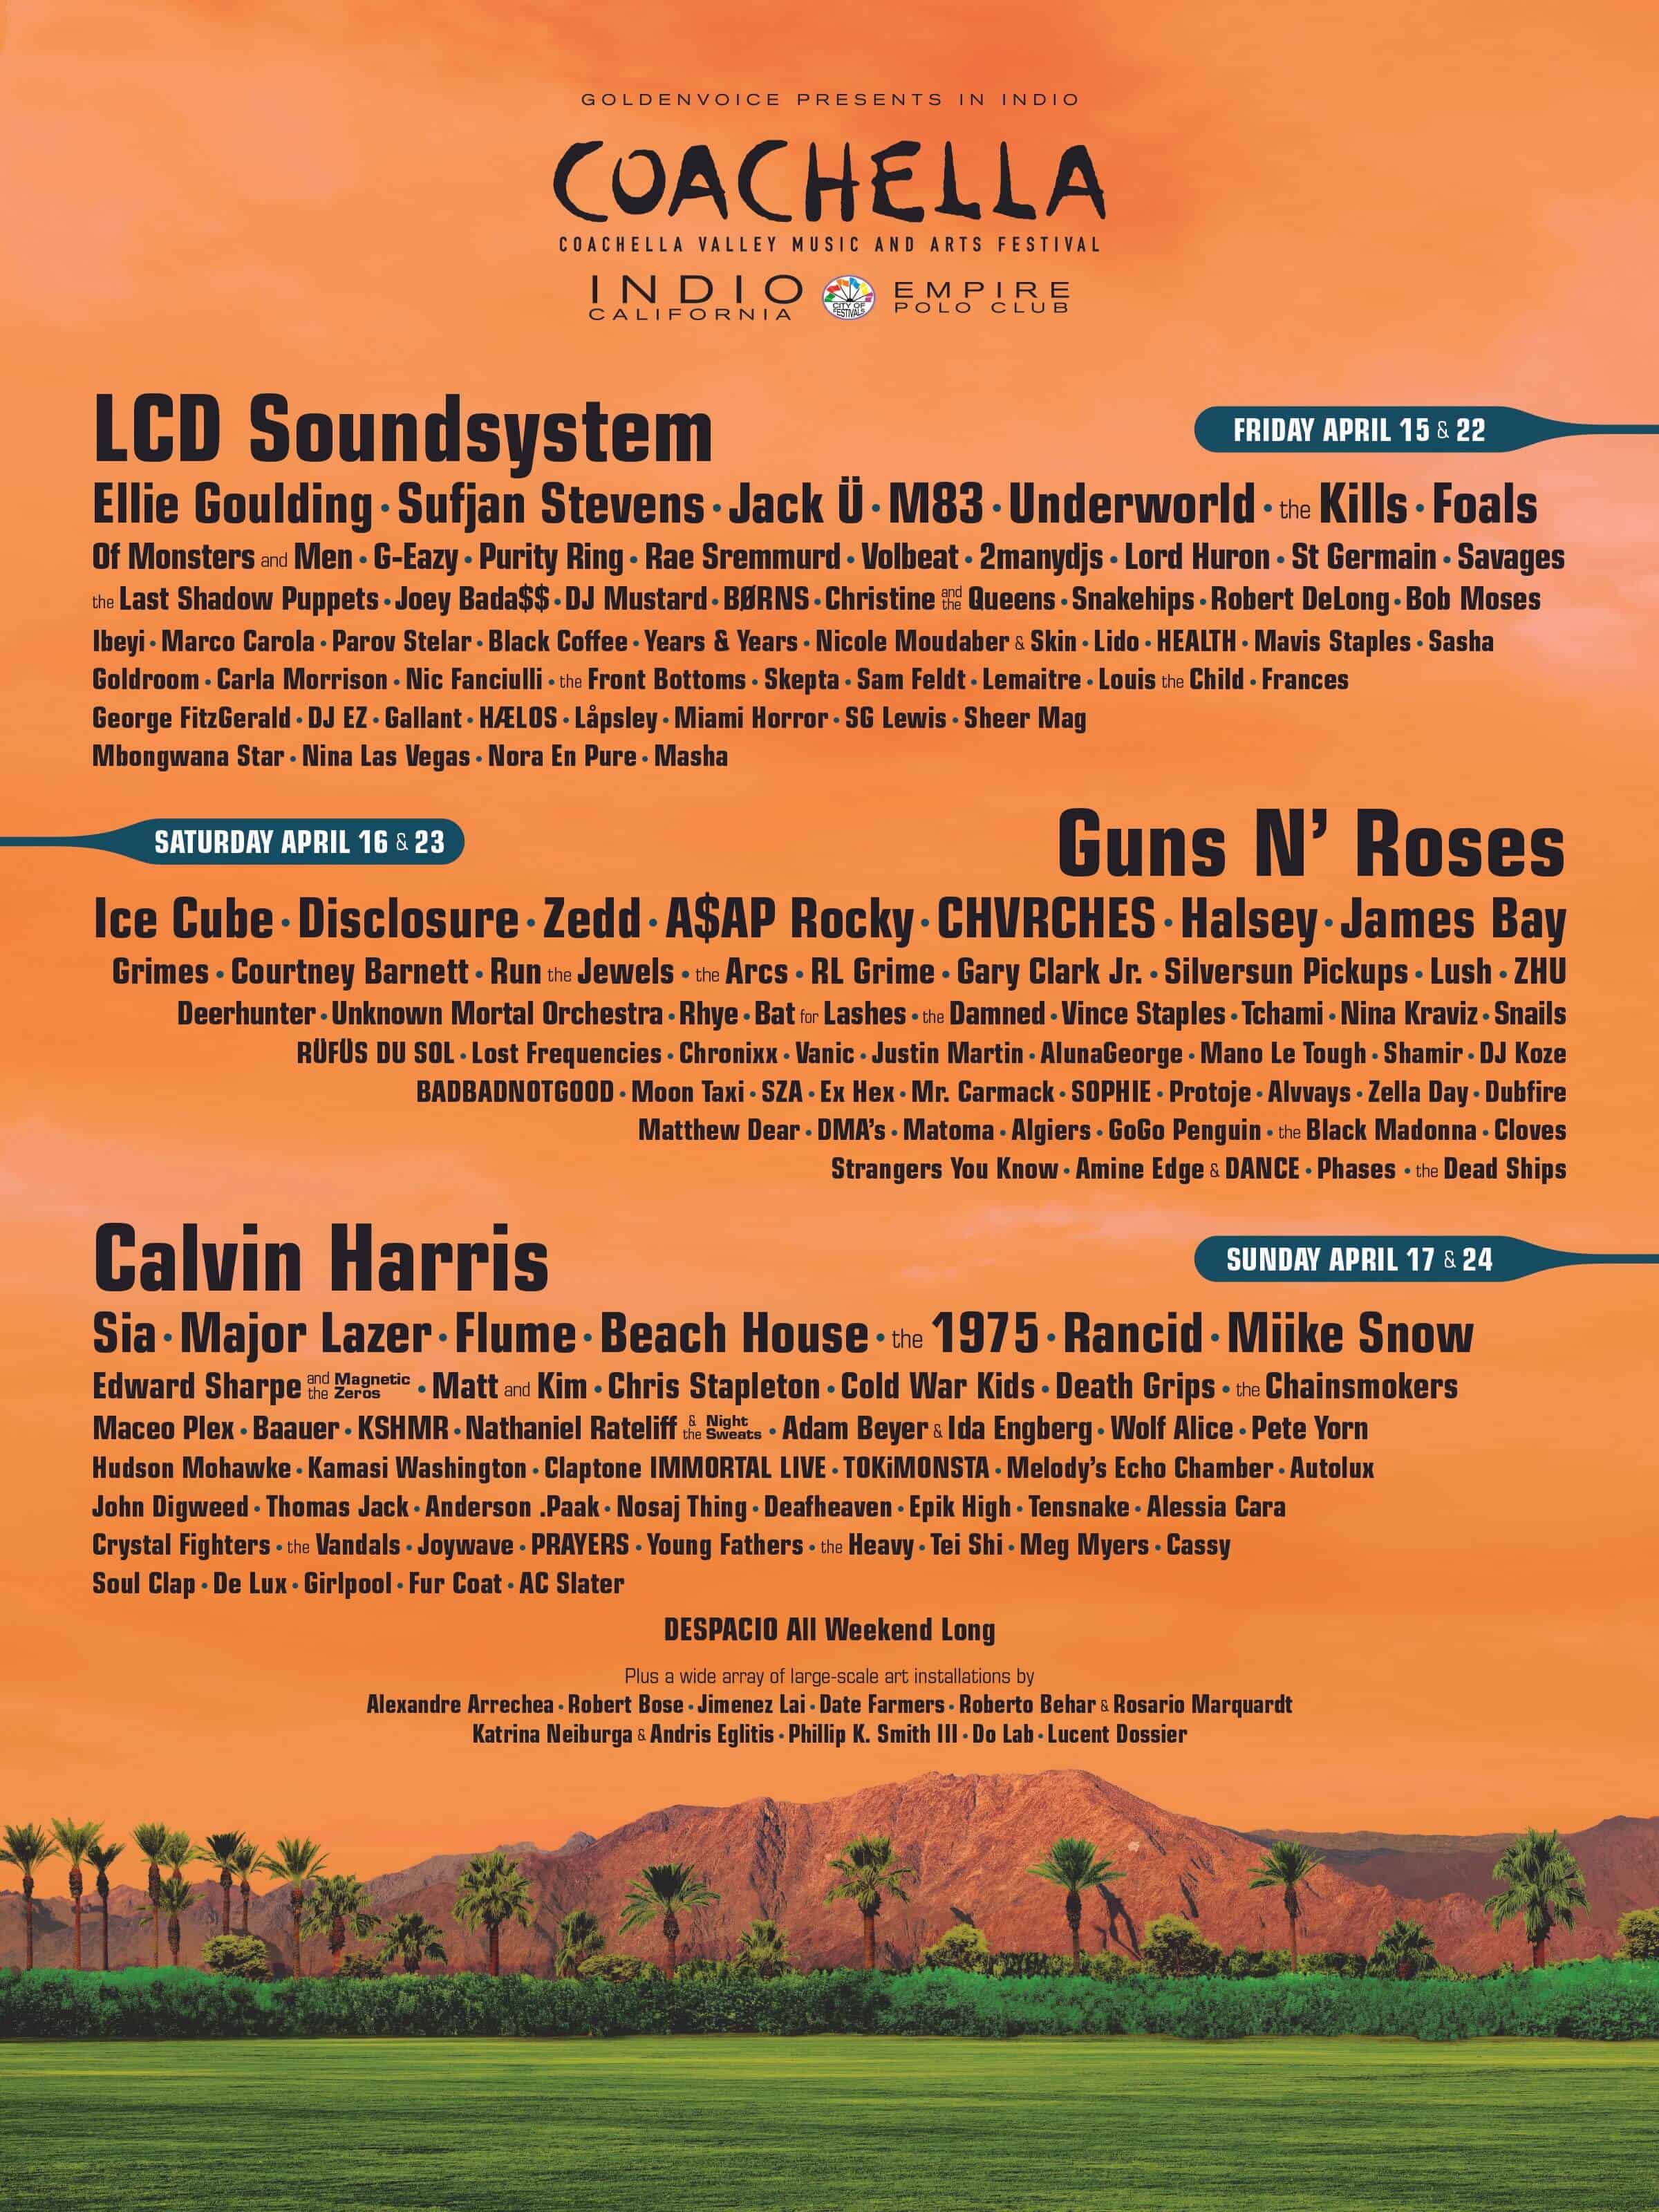 Epik High was part of the lineup for Coachella 2016